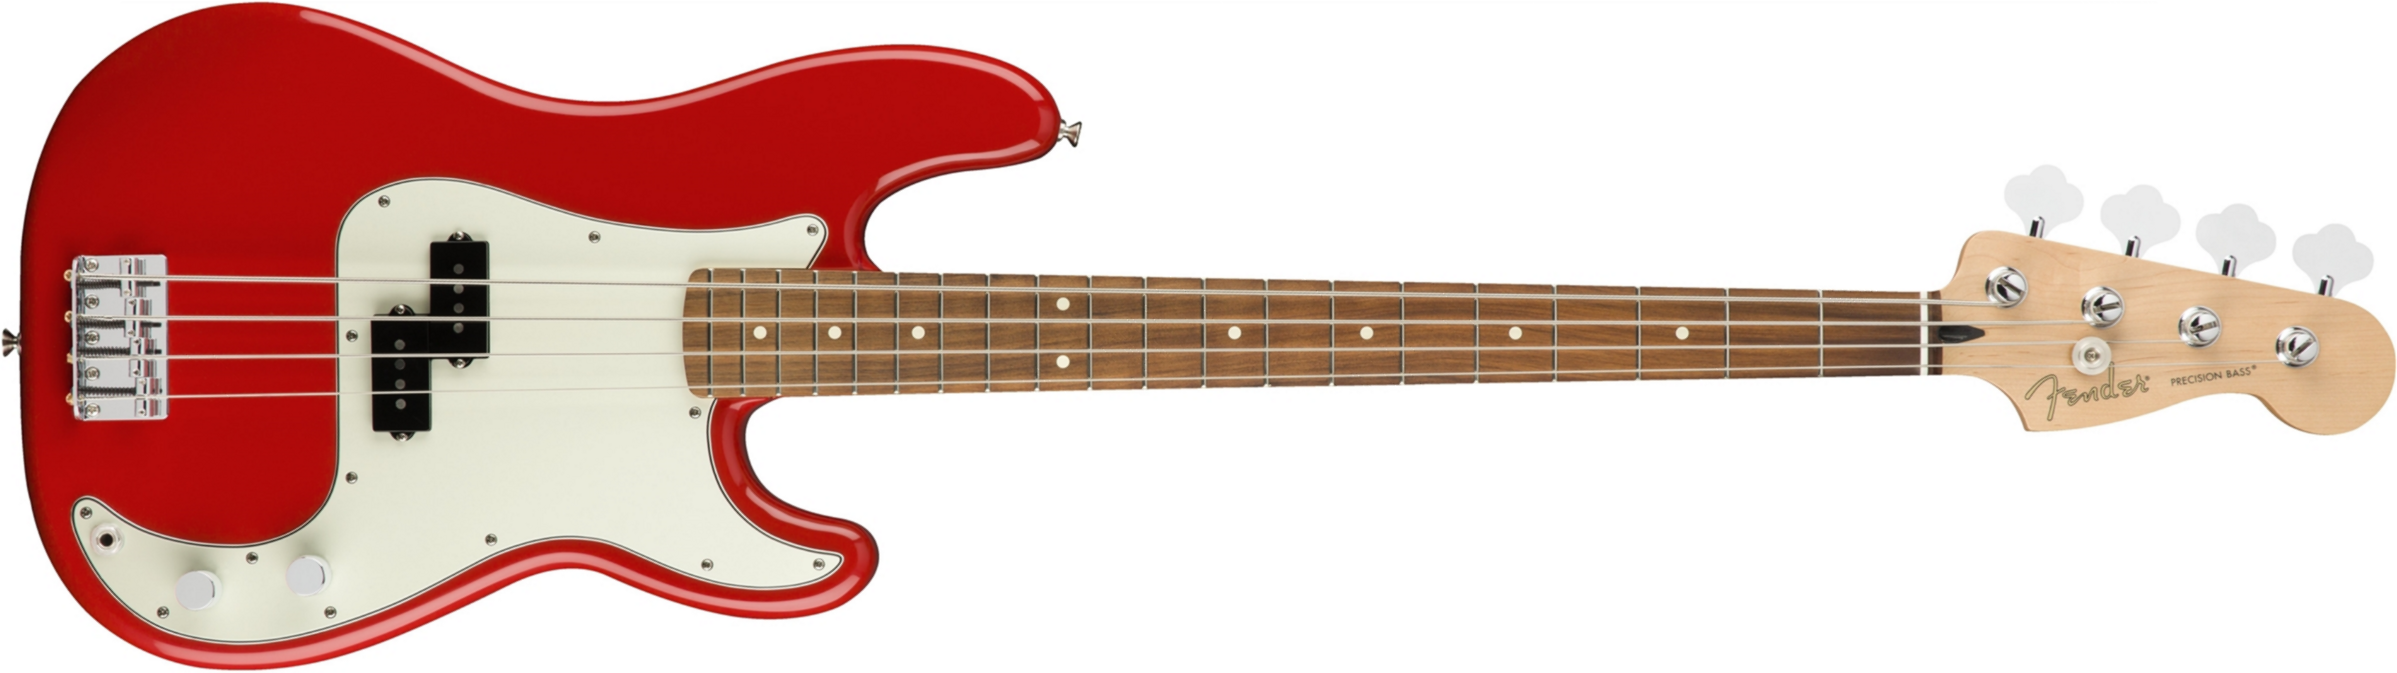 Fender Precision Bass Player Mex Pf - Sonic Red - Solid body elektrische bas - Main picture